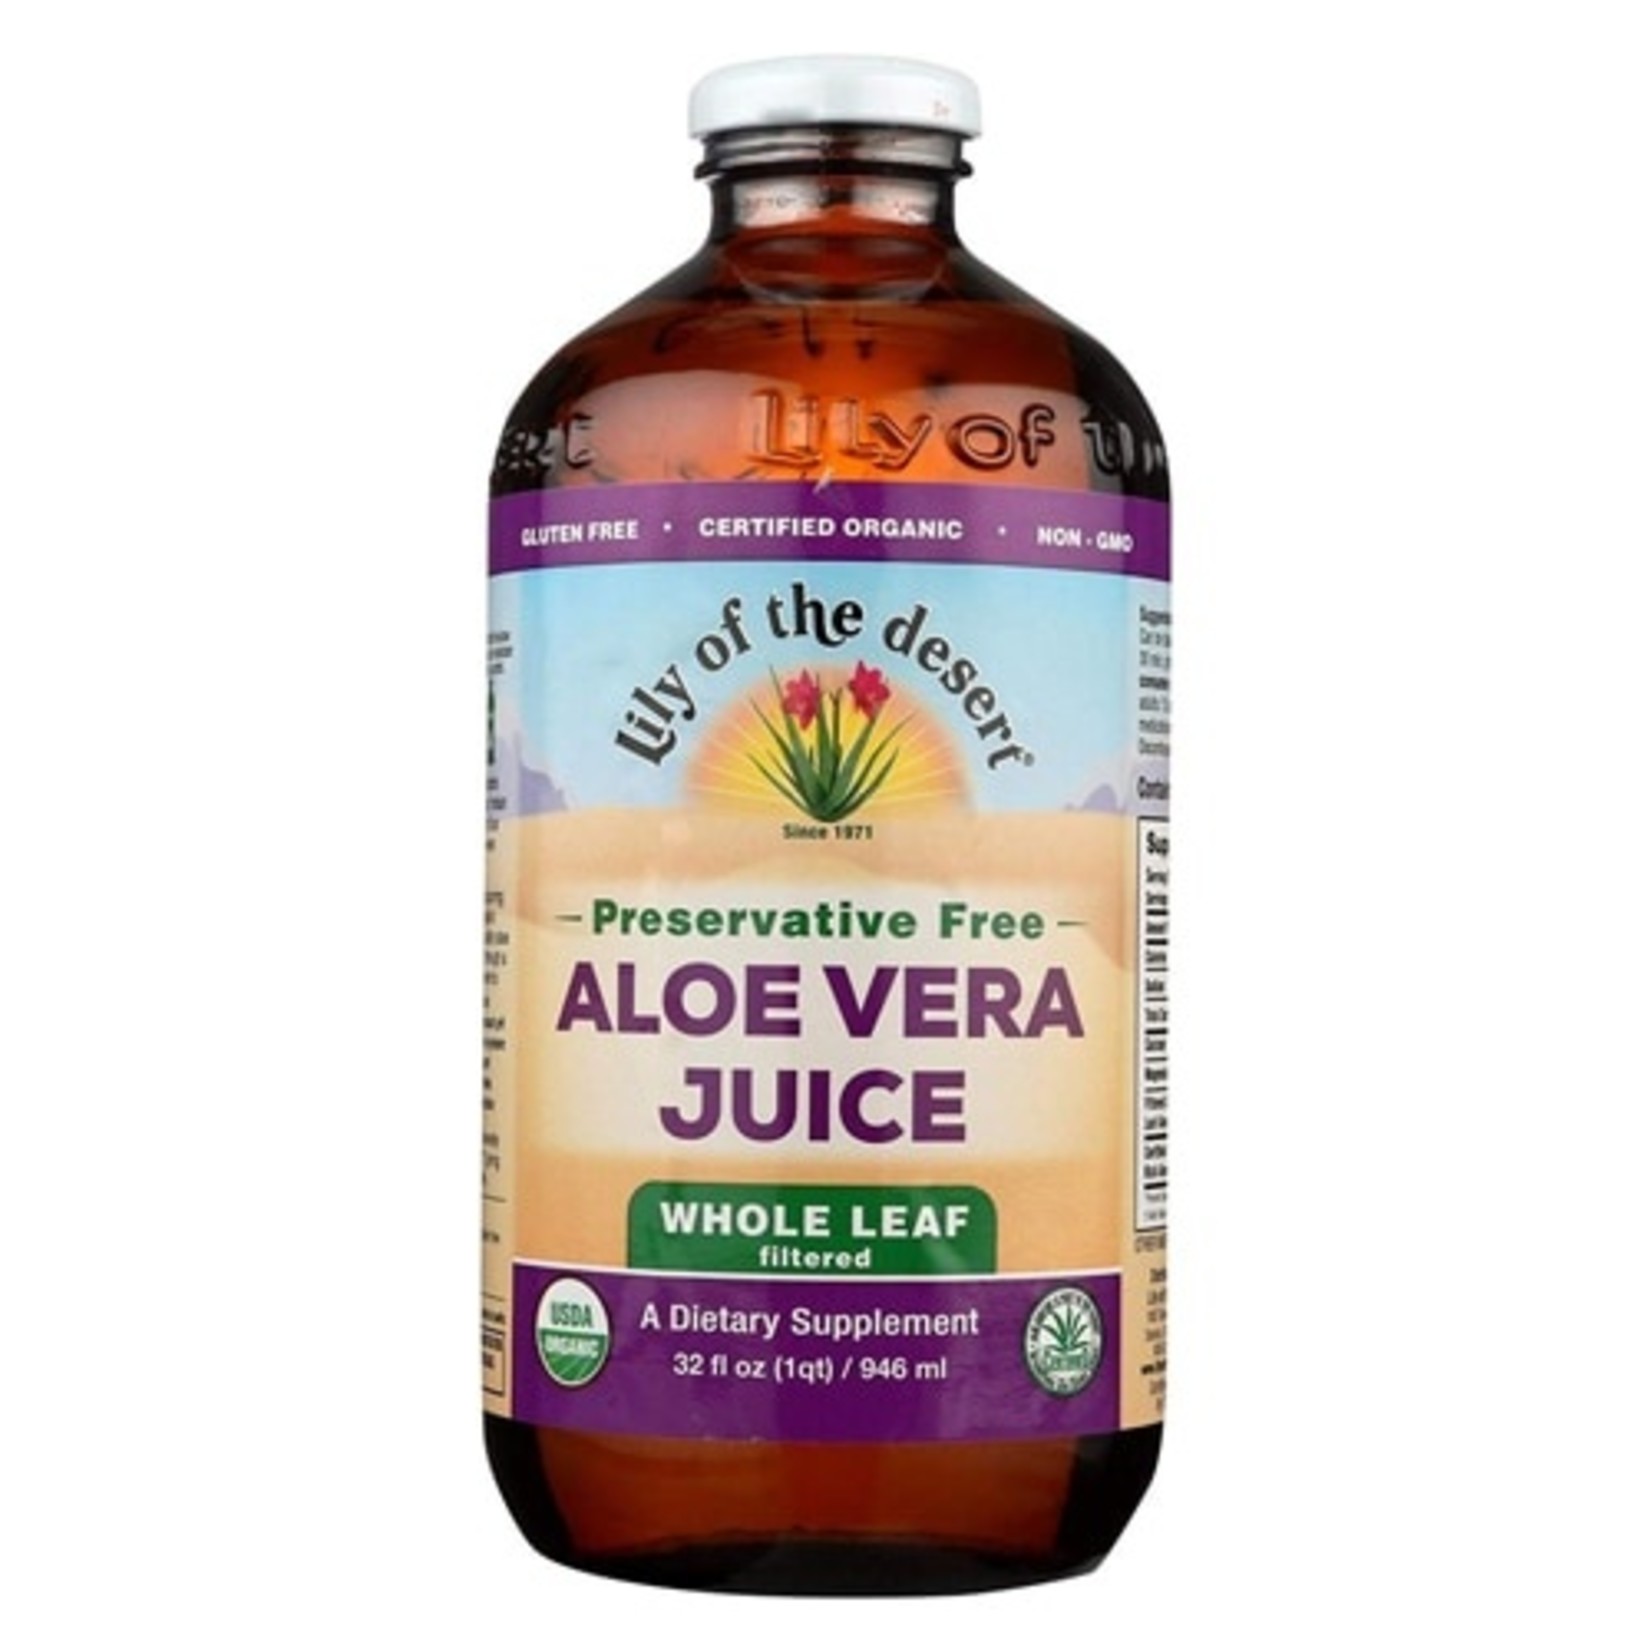 Lily Of The Desert Lily Of The Desert - Aloe Vera Juice Whole Leaf Preservative Free - 32 oz